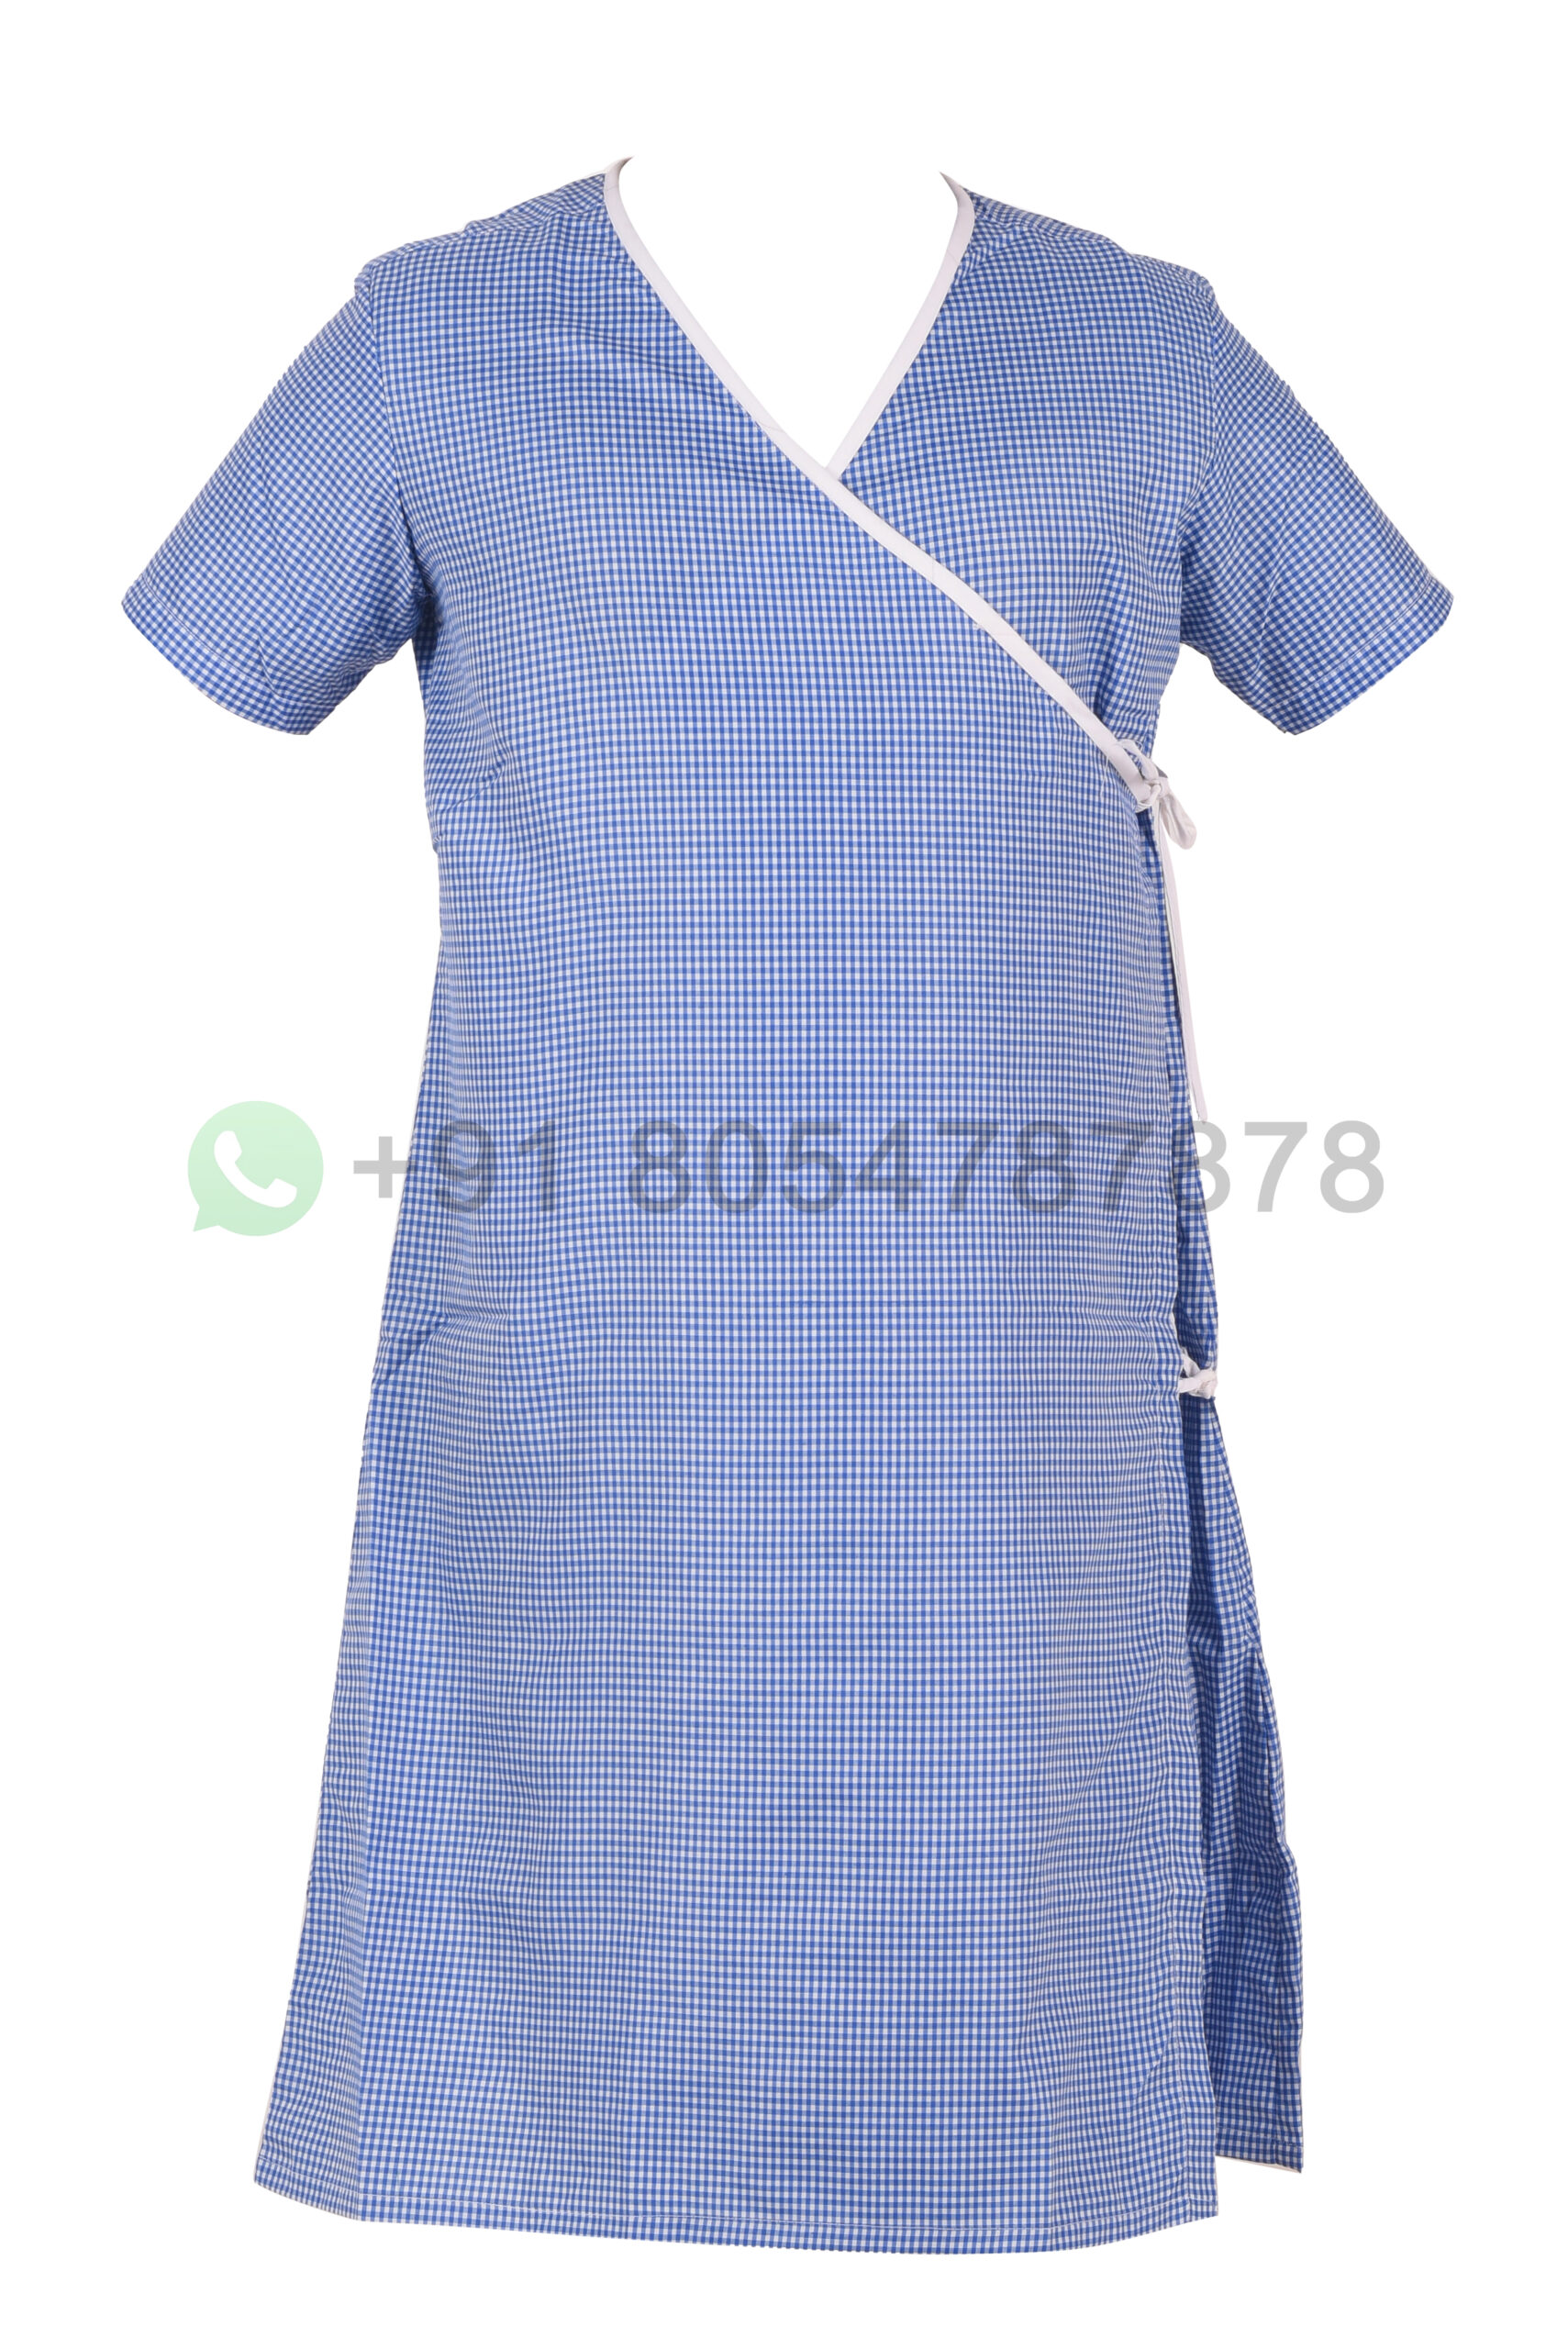 Why Provide Medical & hospital Uniforms To Employees? - Unifab India